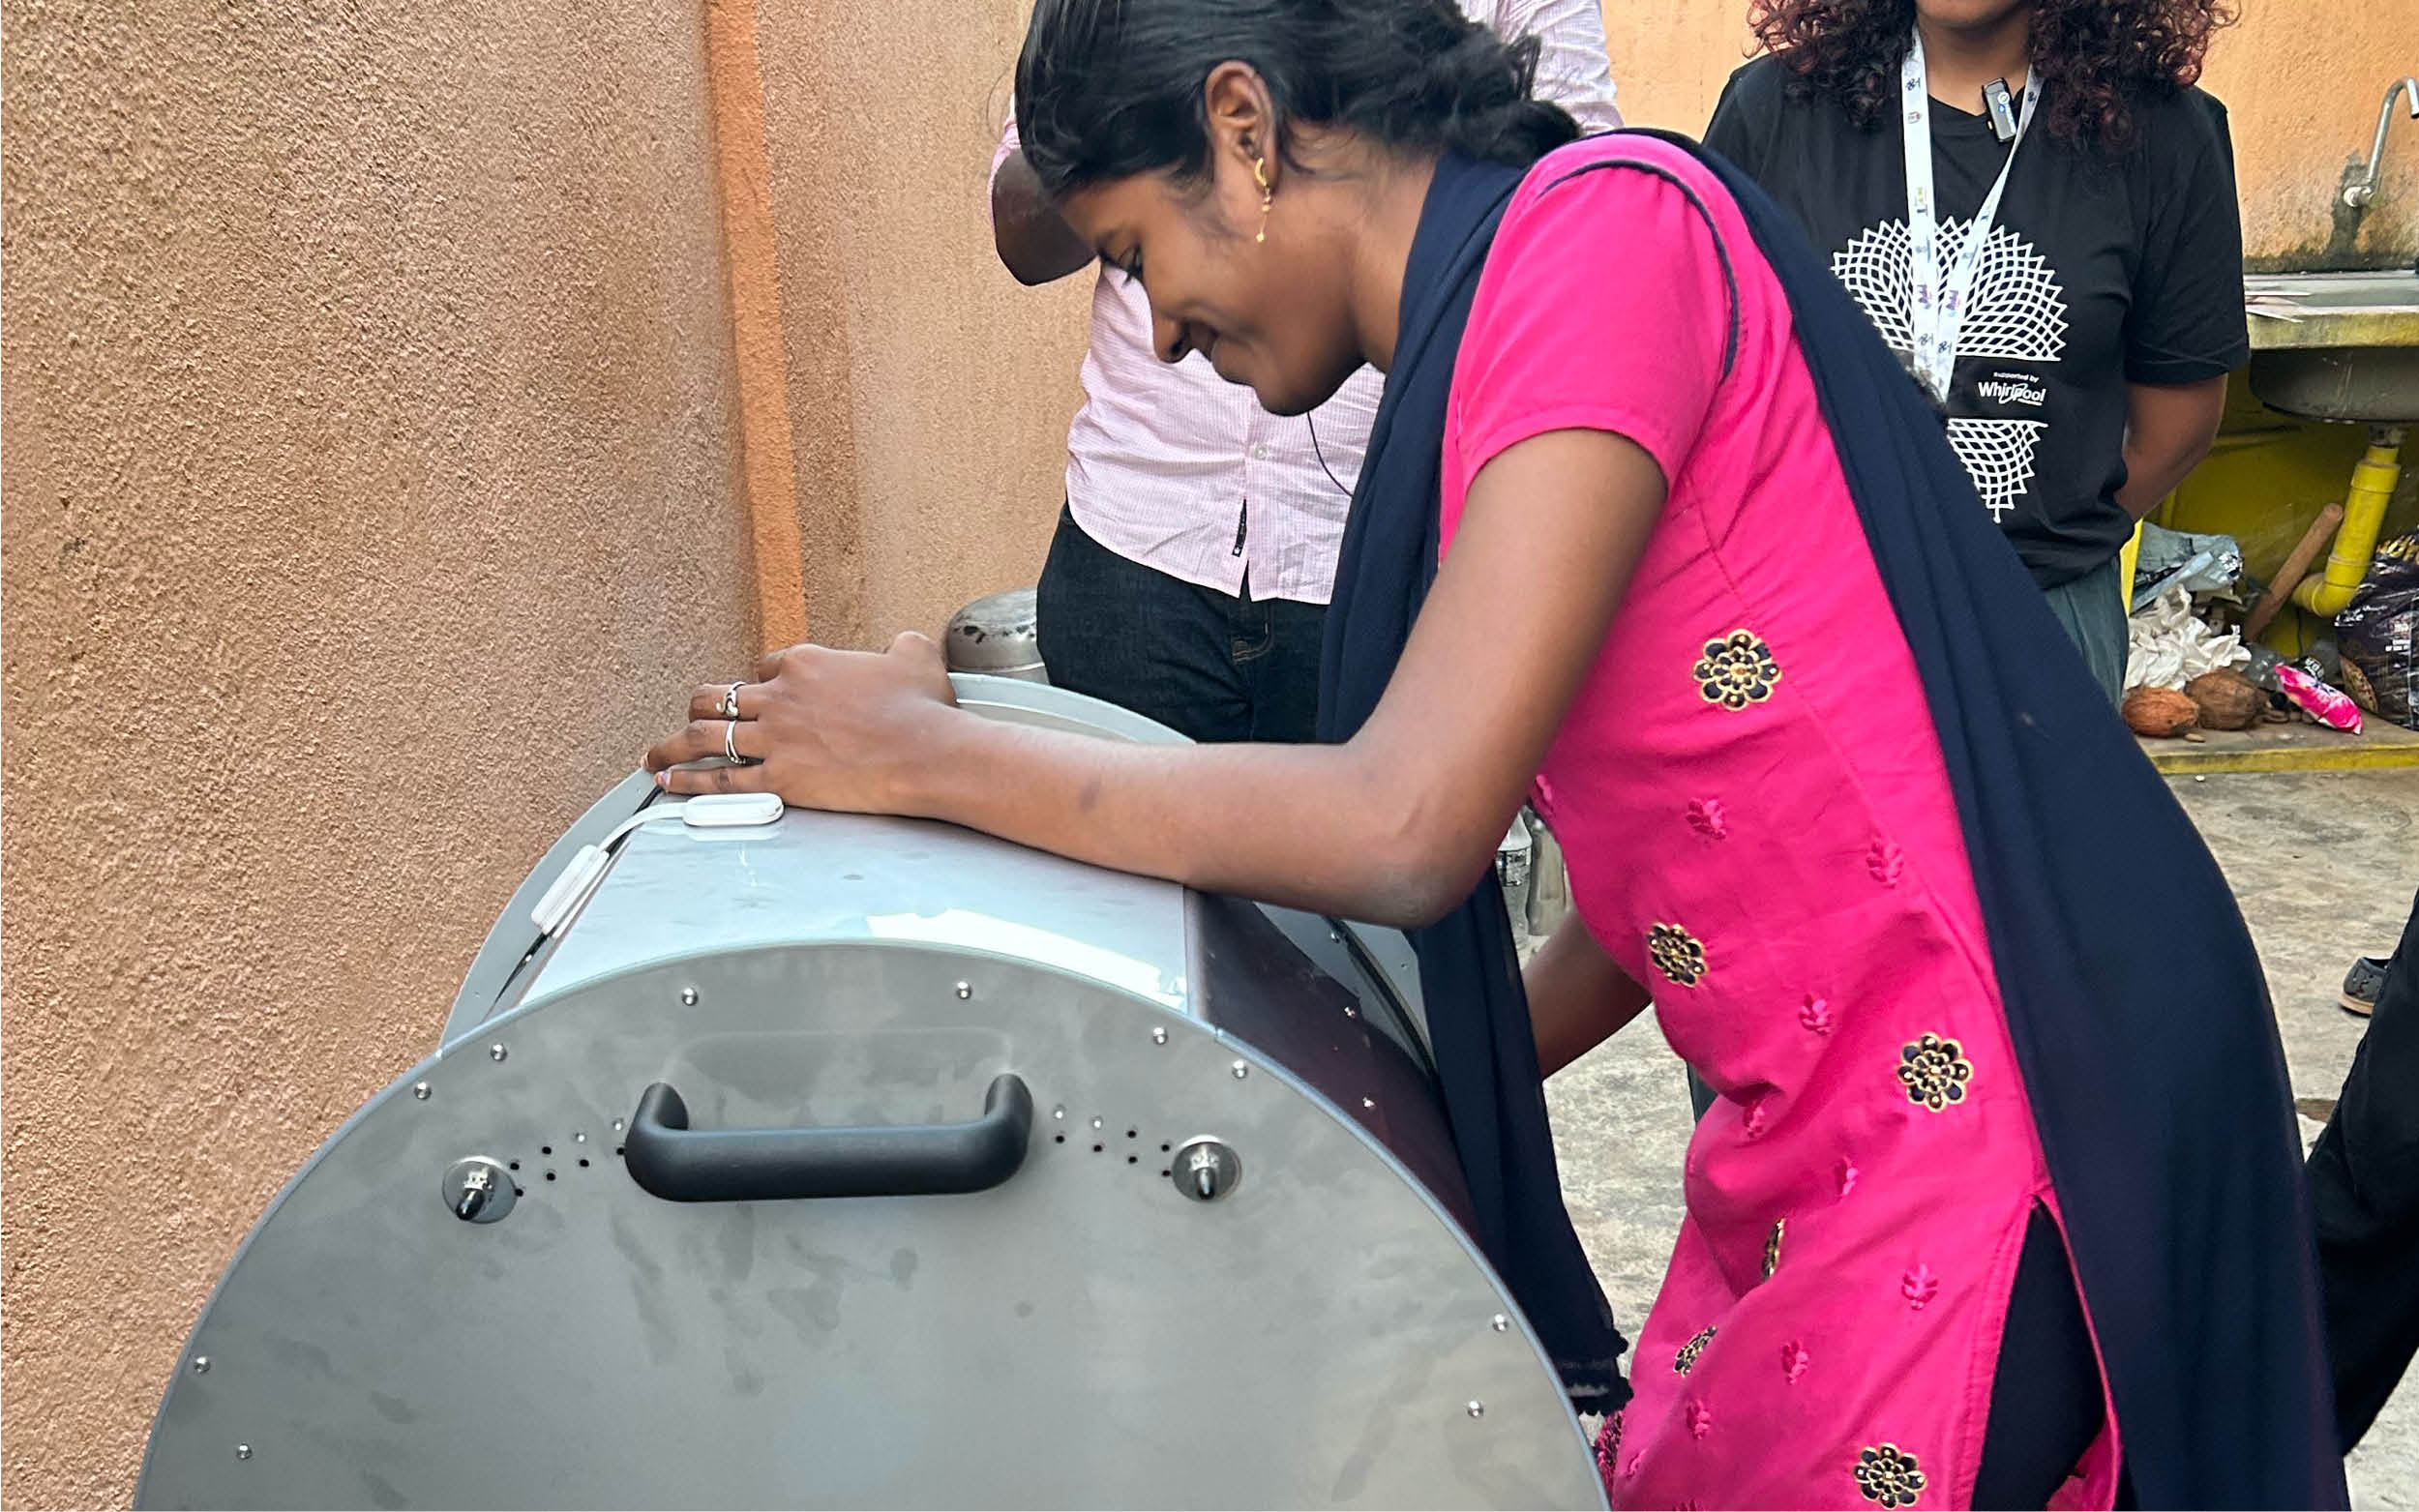 Half the Global Population Washes Clothes by Hand: Whirlpool Foundation, The Washing Machine Project Helping Address with Thousands of Manual Washing Machines 4